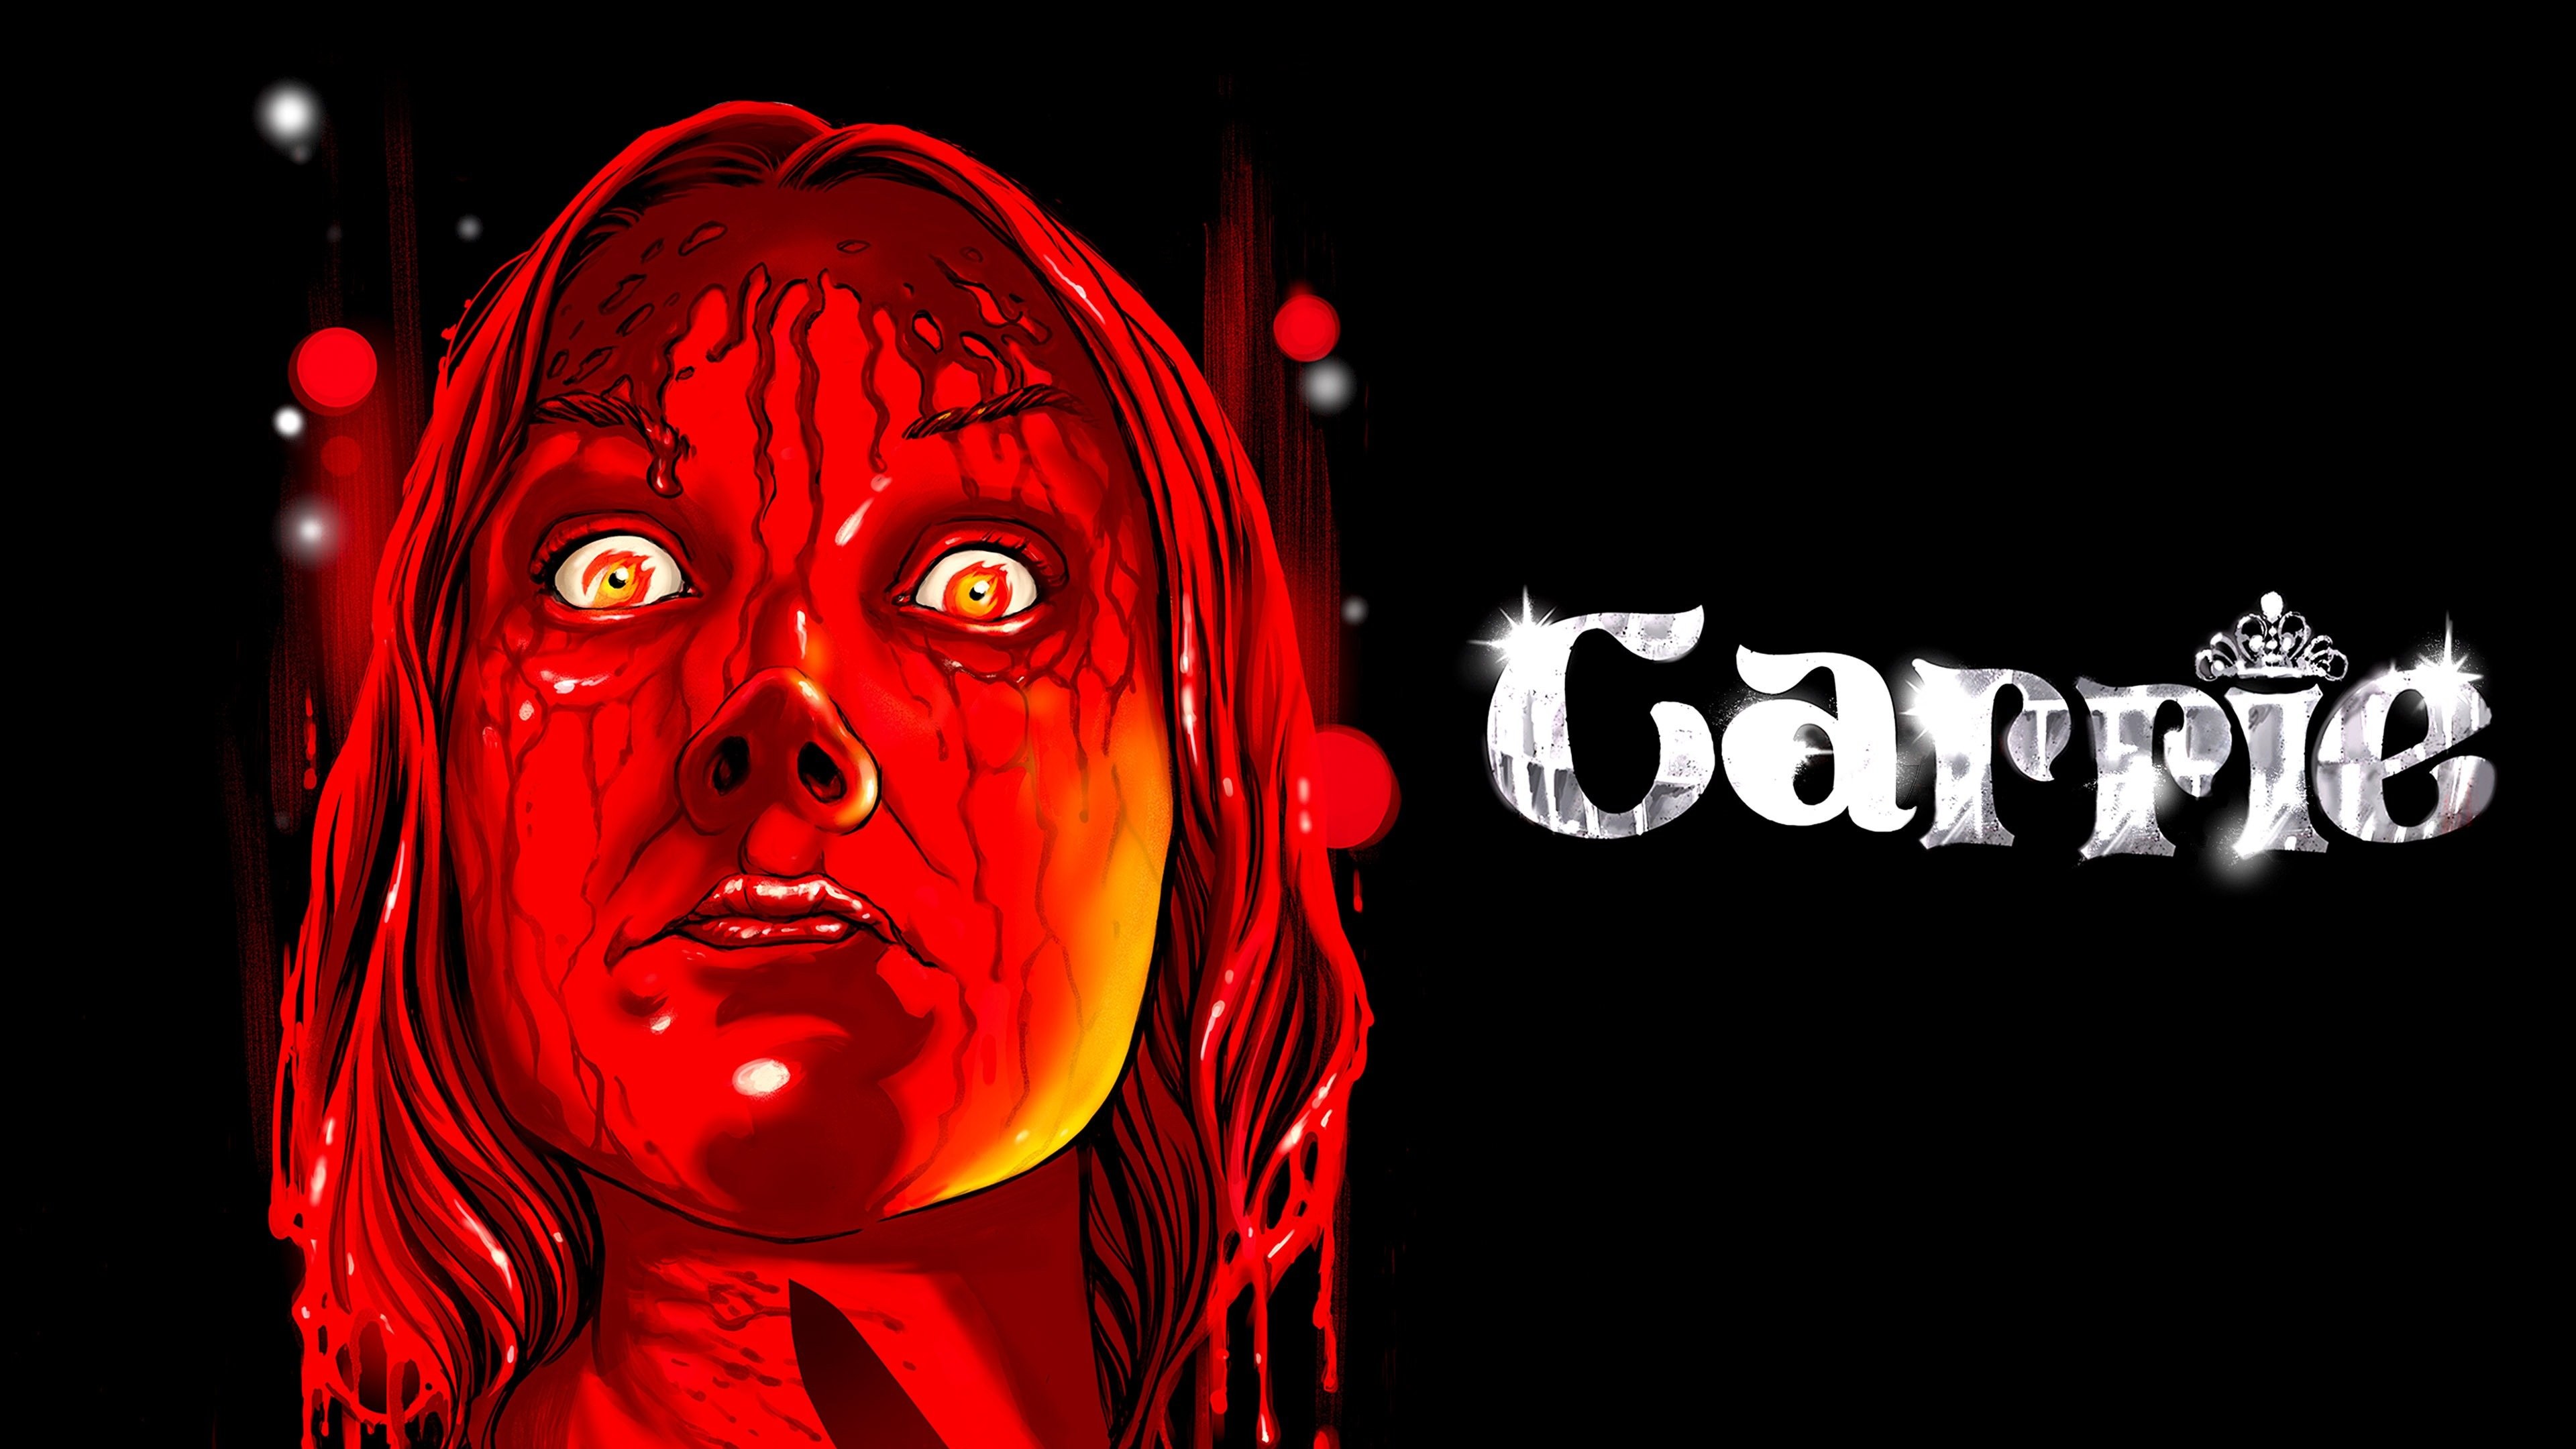 carrie movie 1976 cast